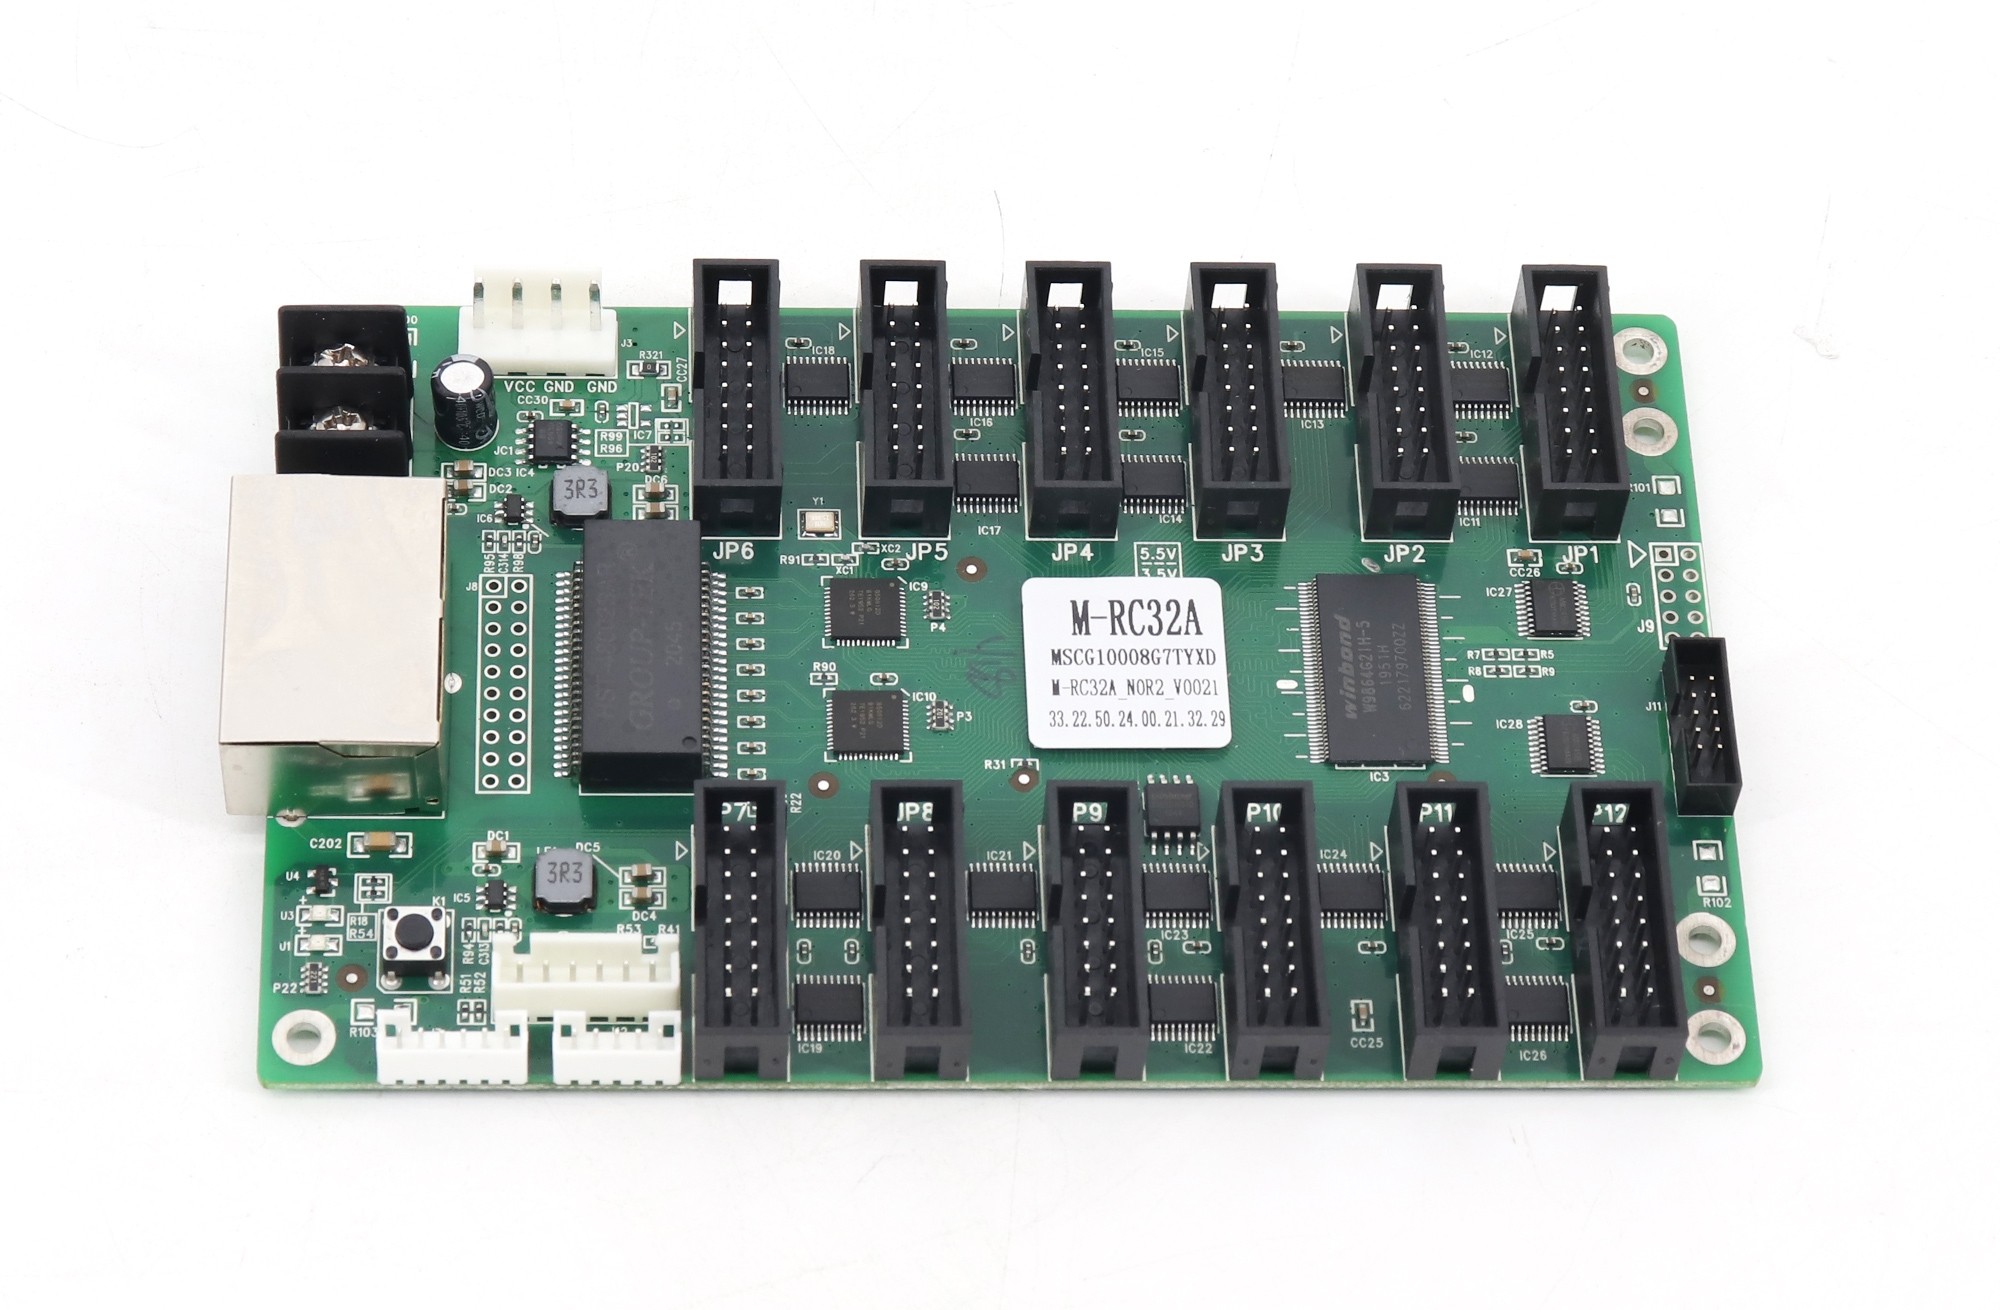 Moocell M-RC32A EMC LED Display Controller Card - LED Receiving Card